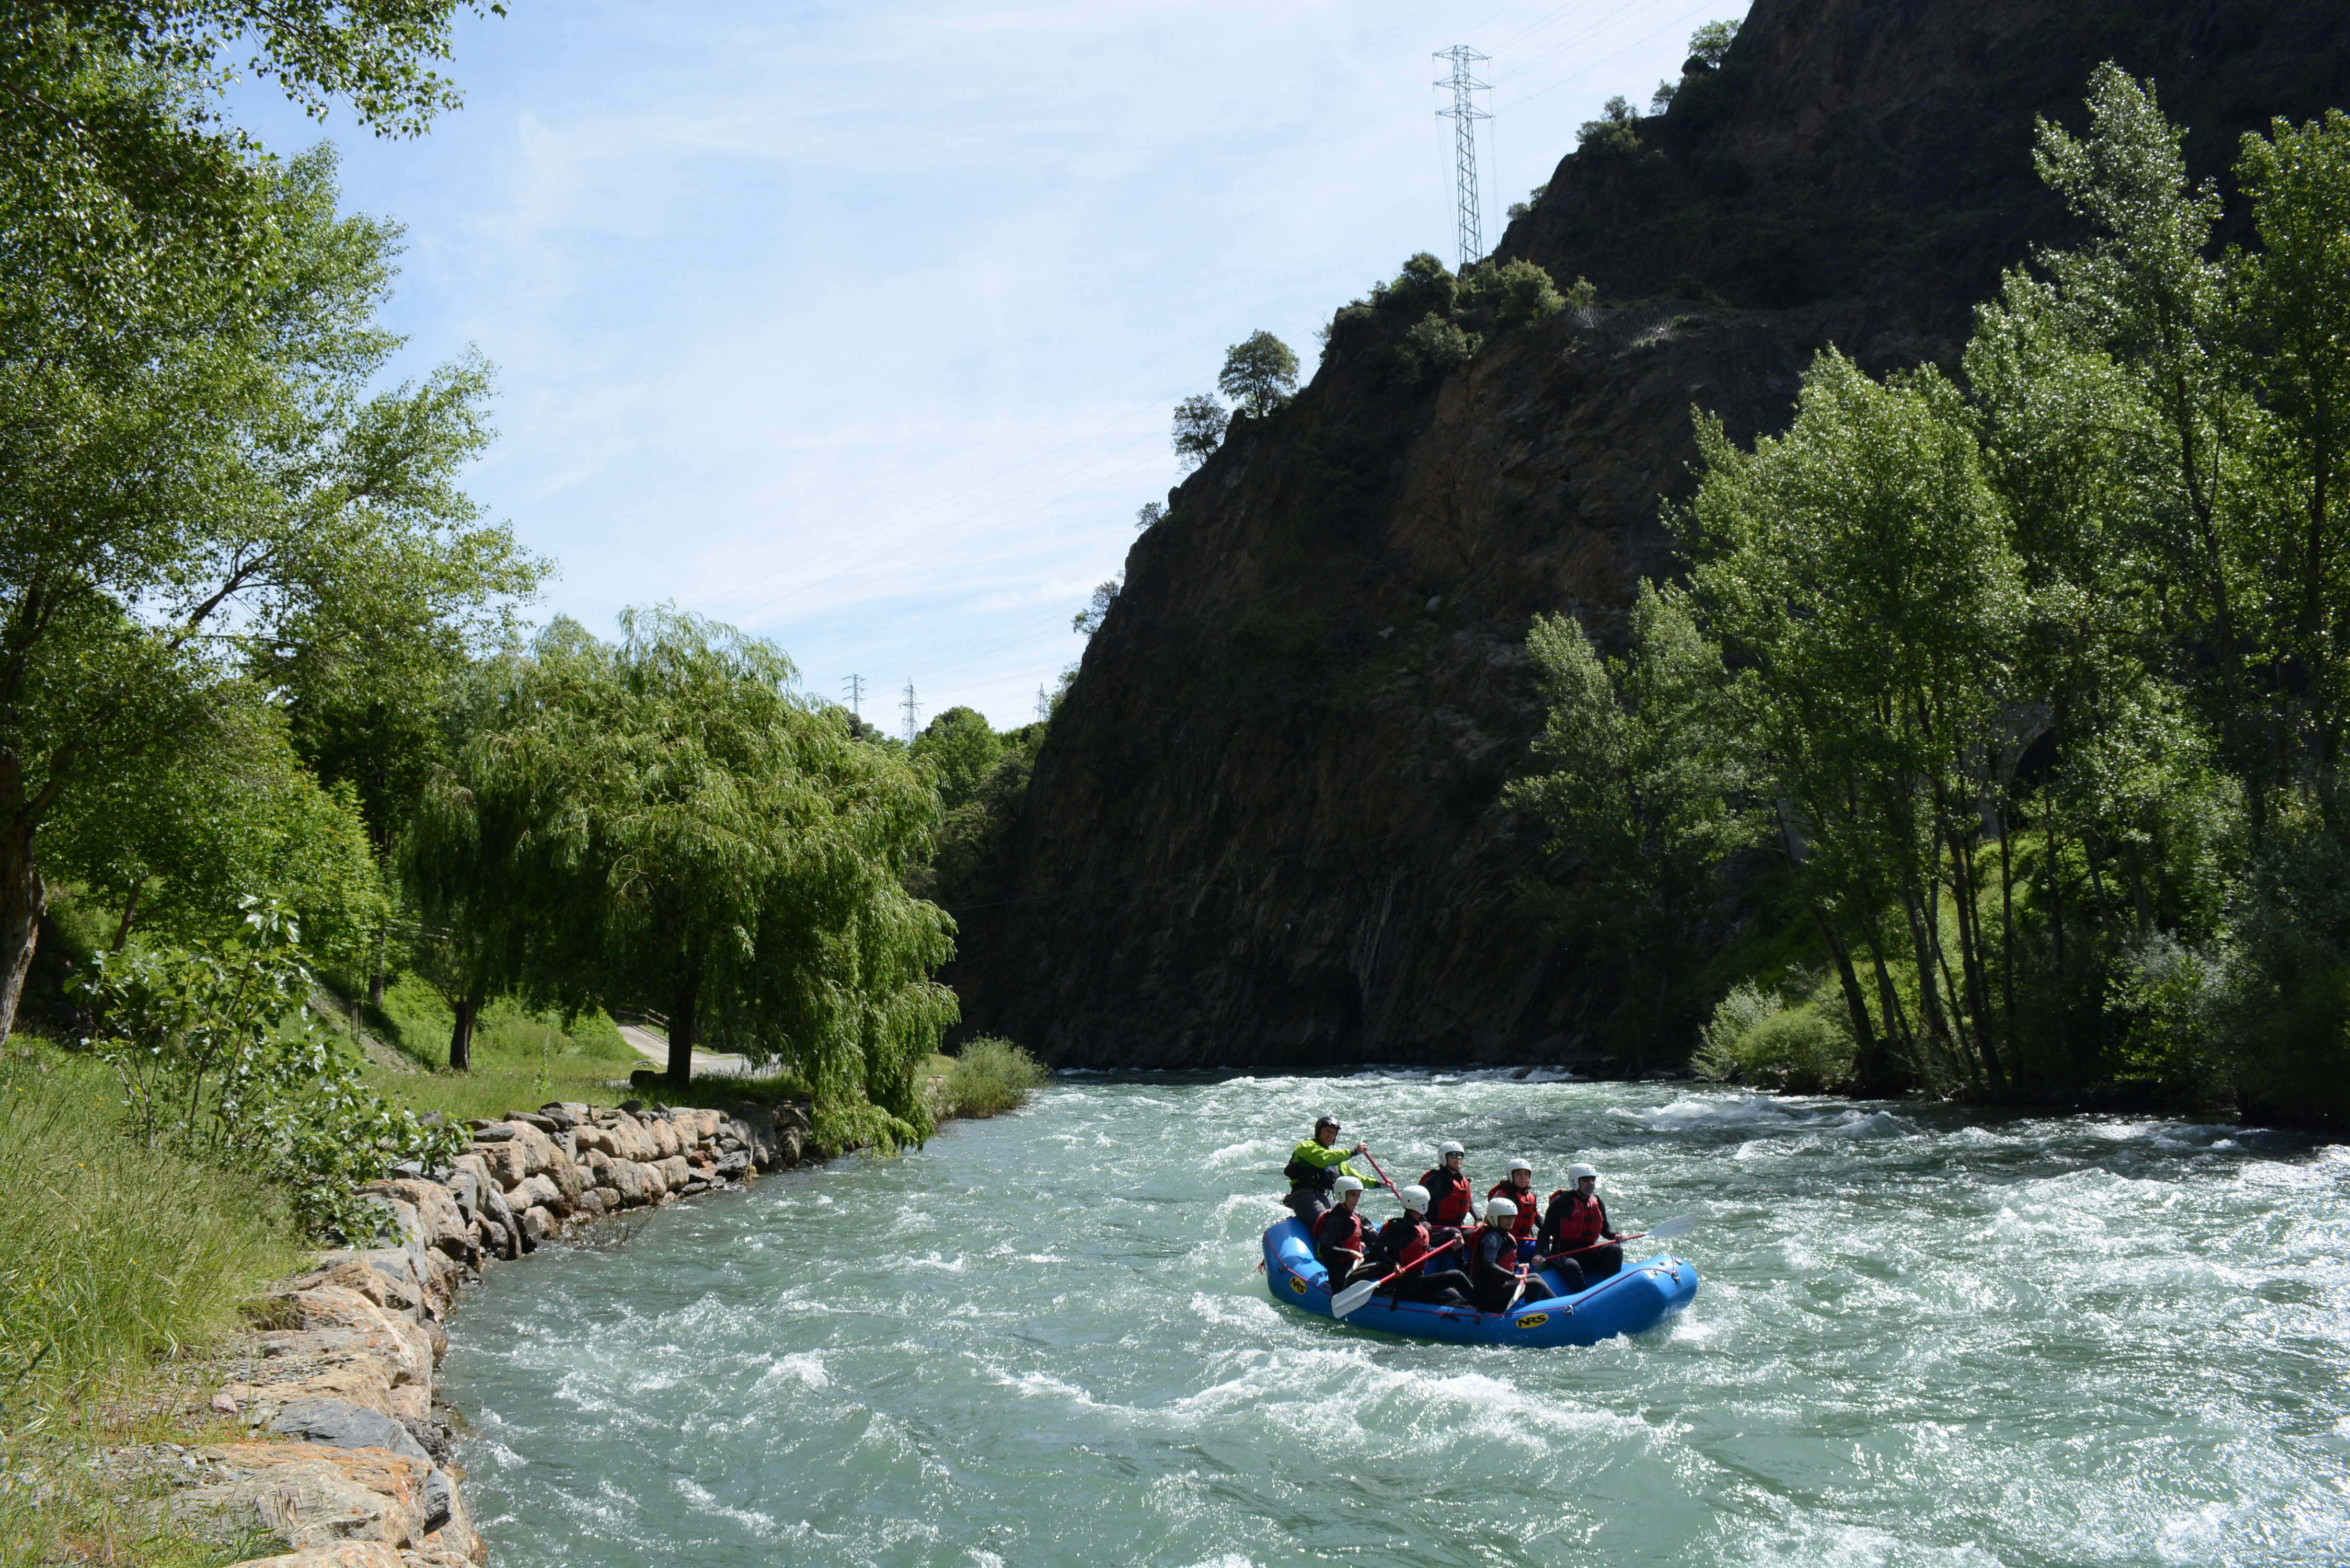 The Pyrenees – A Great Year-Round Destination for Active Families